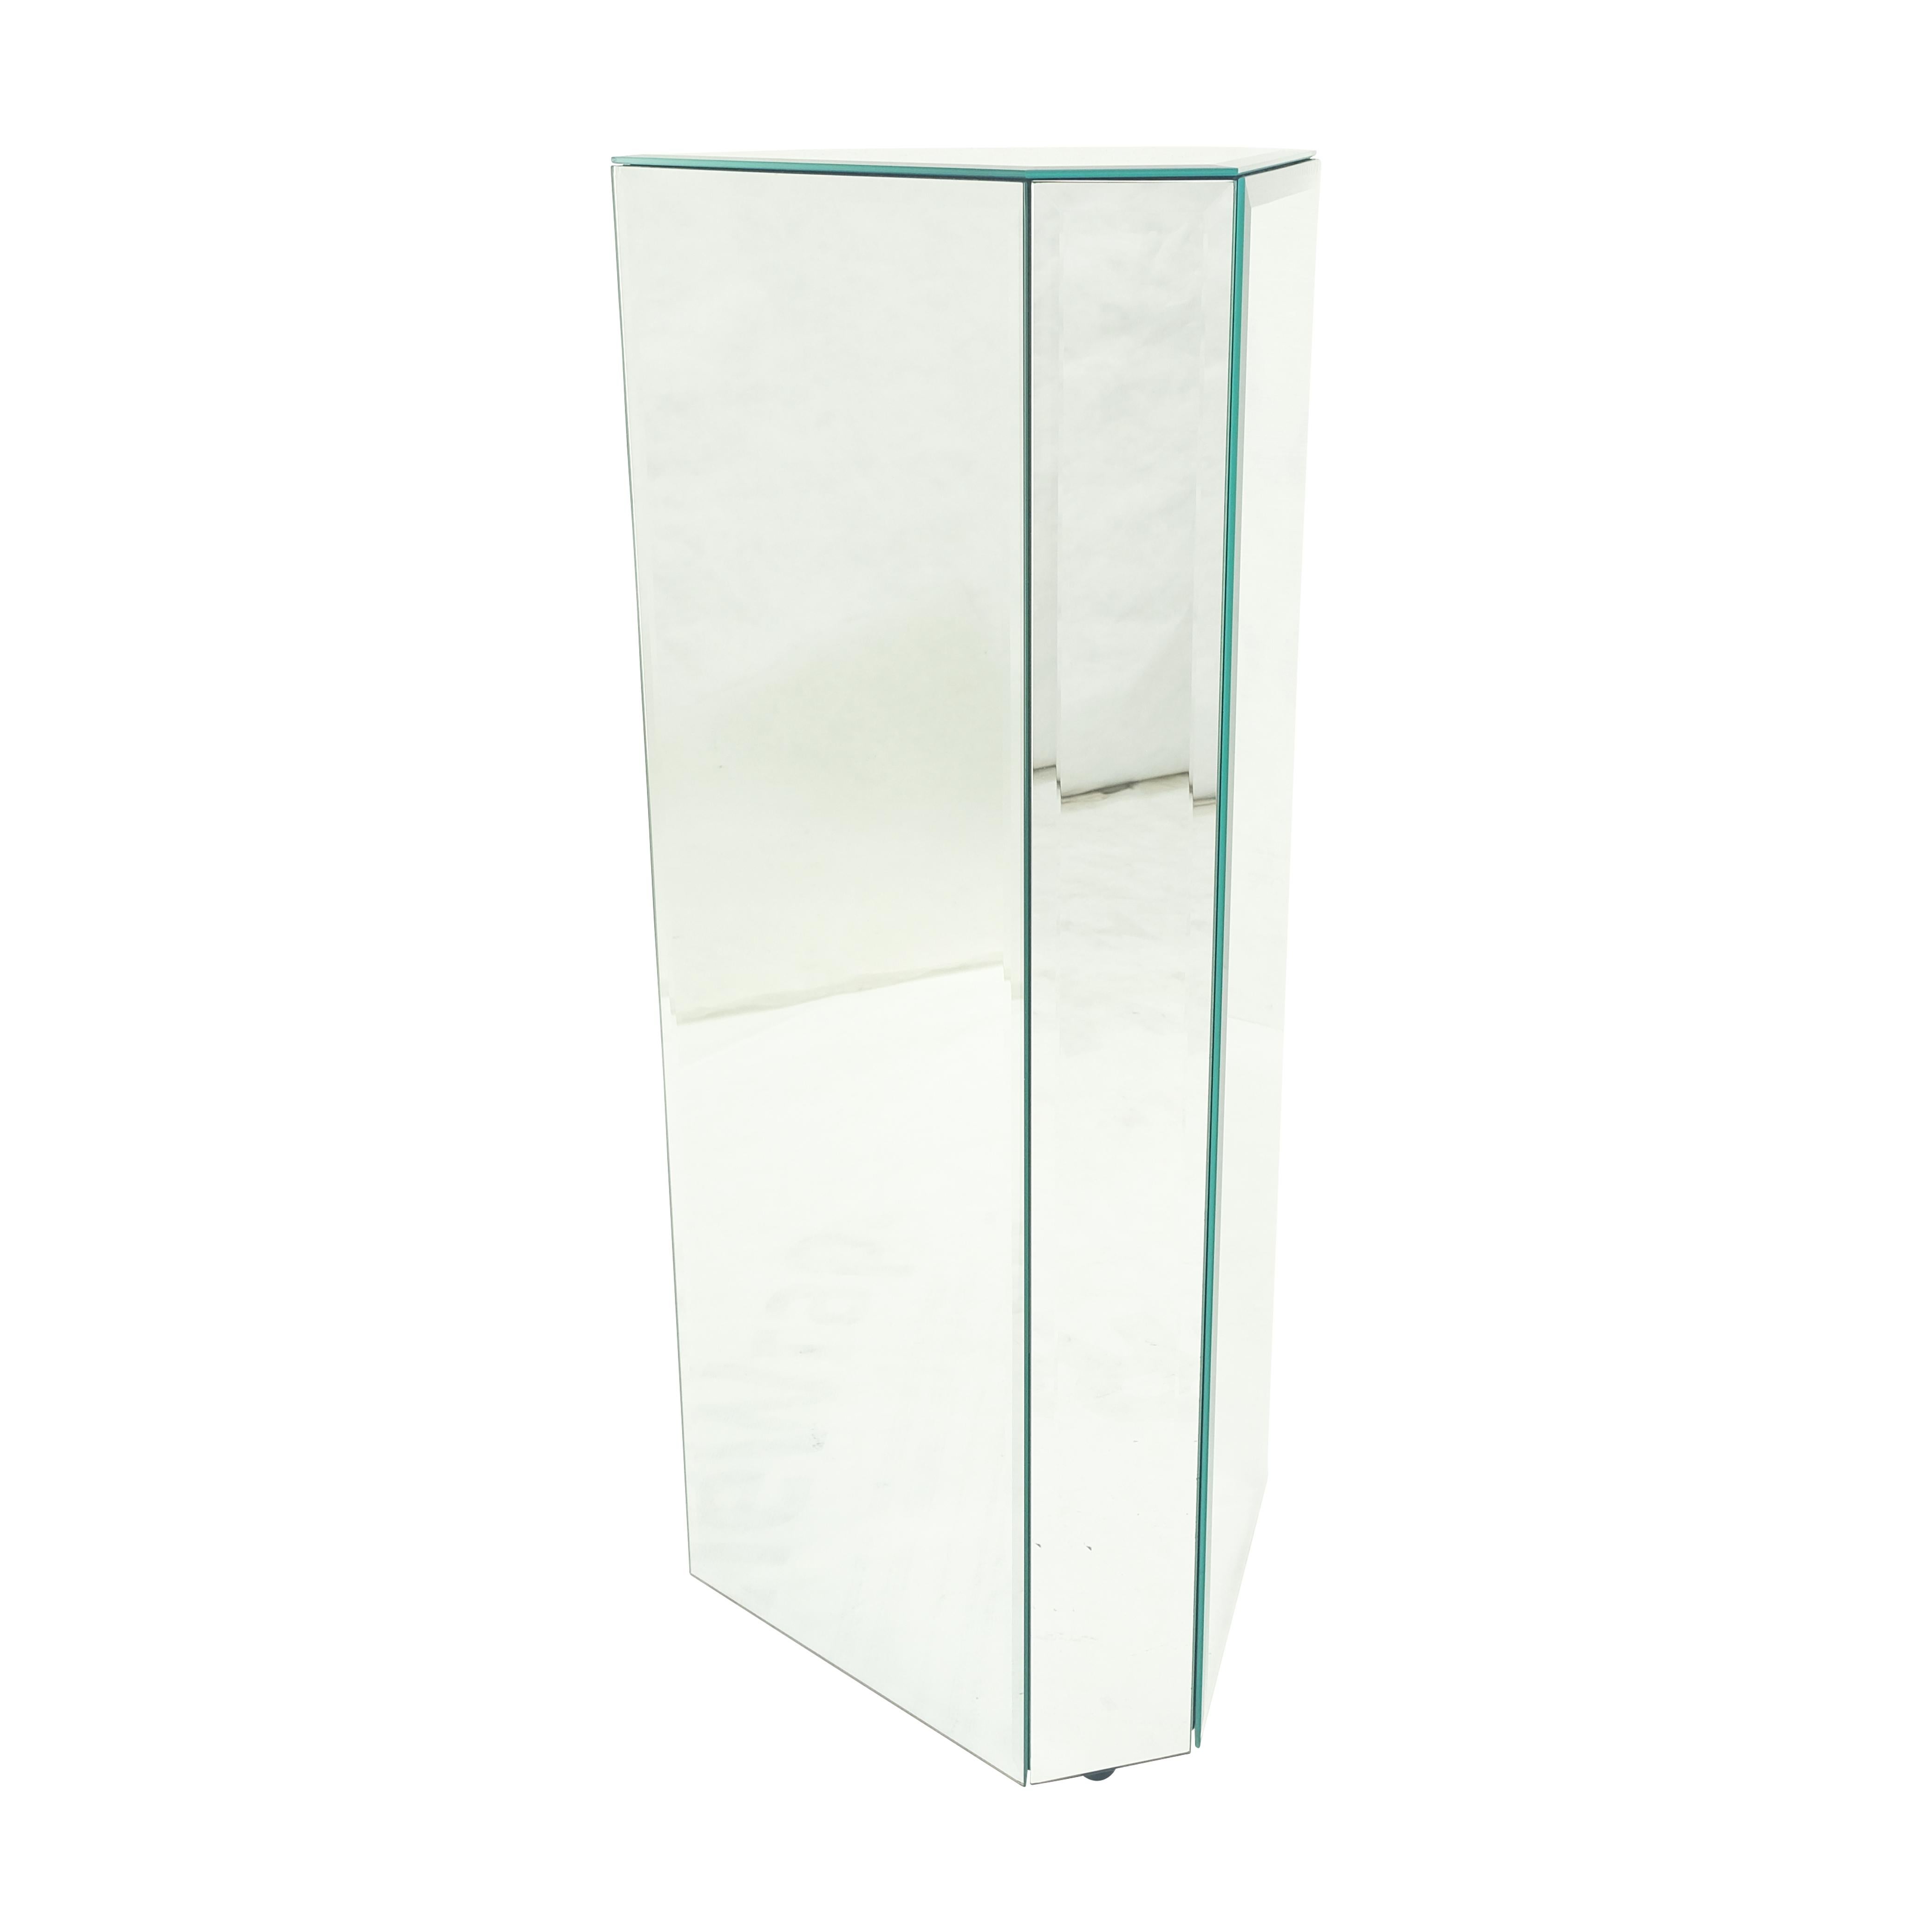 Mid Century Modern Triangle Cut Corners Glass Beveled Mirror Pedestal Stand MINT For Sale 1